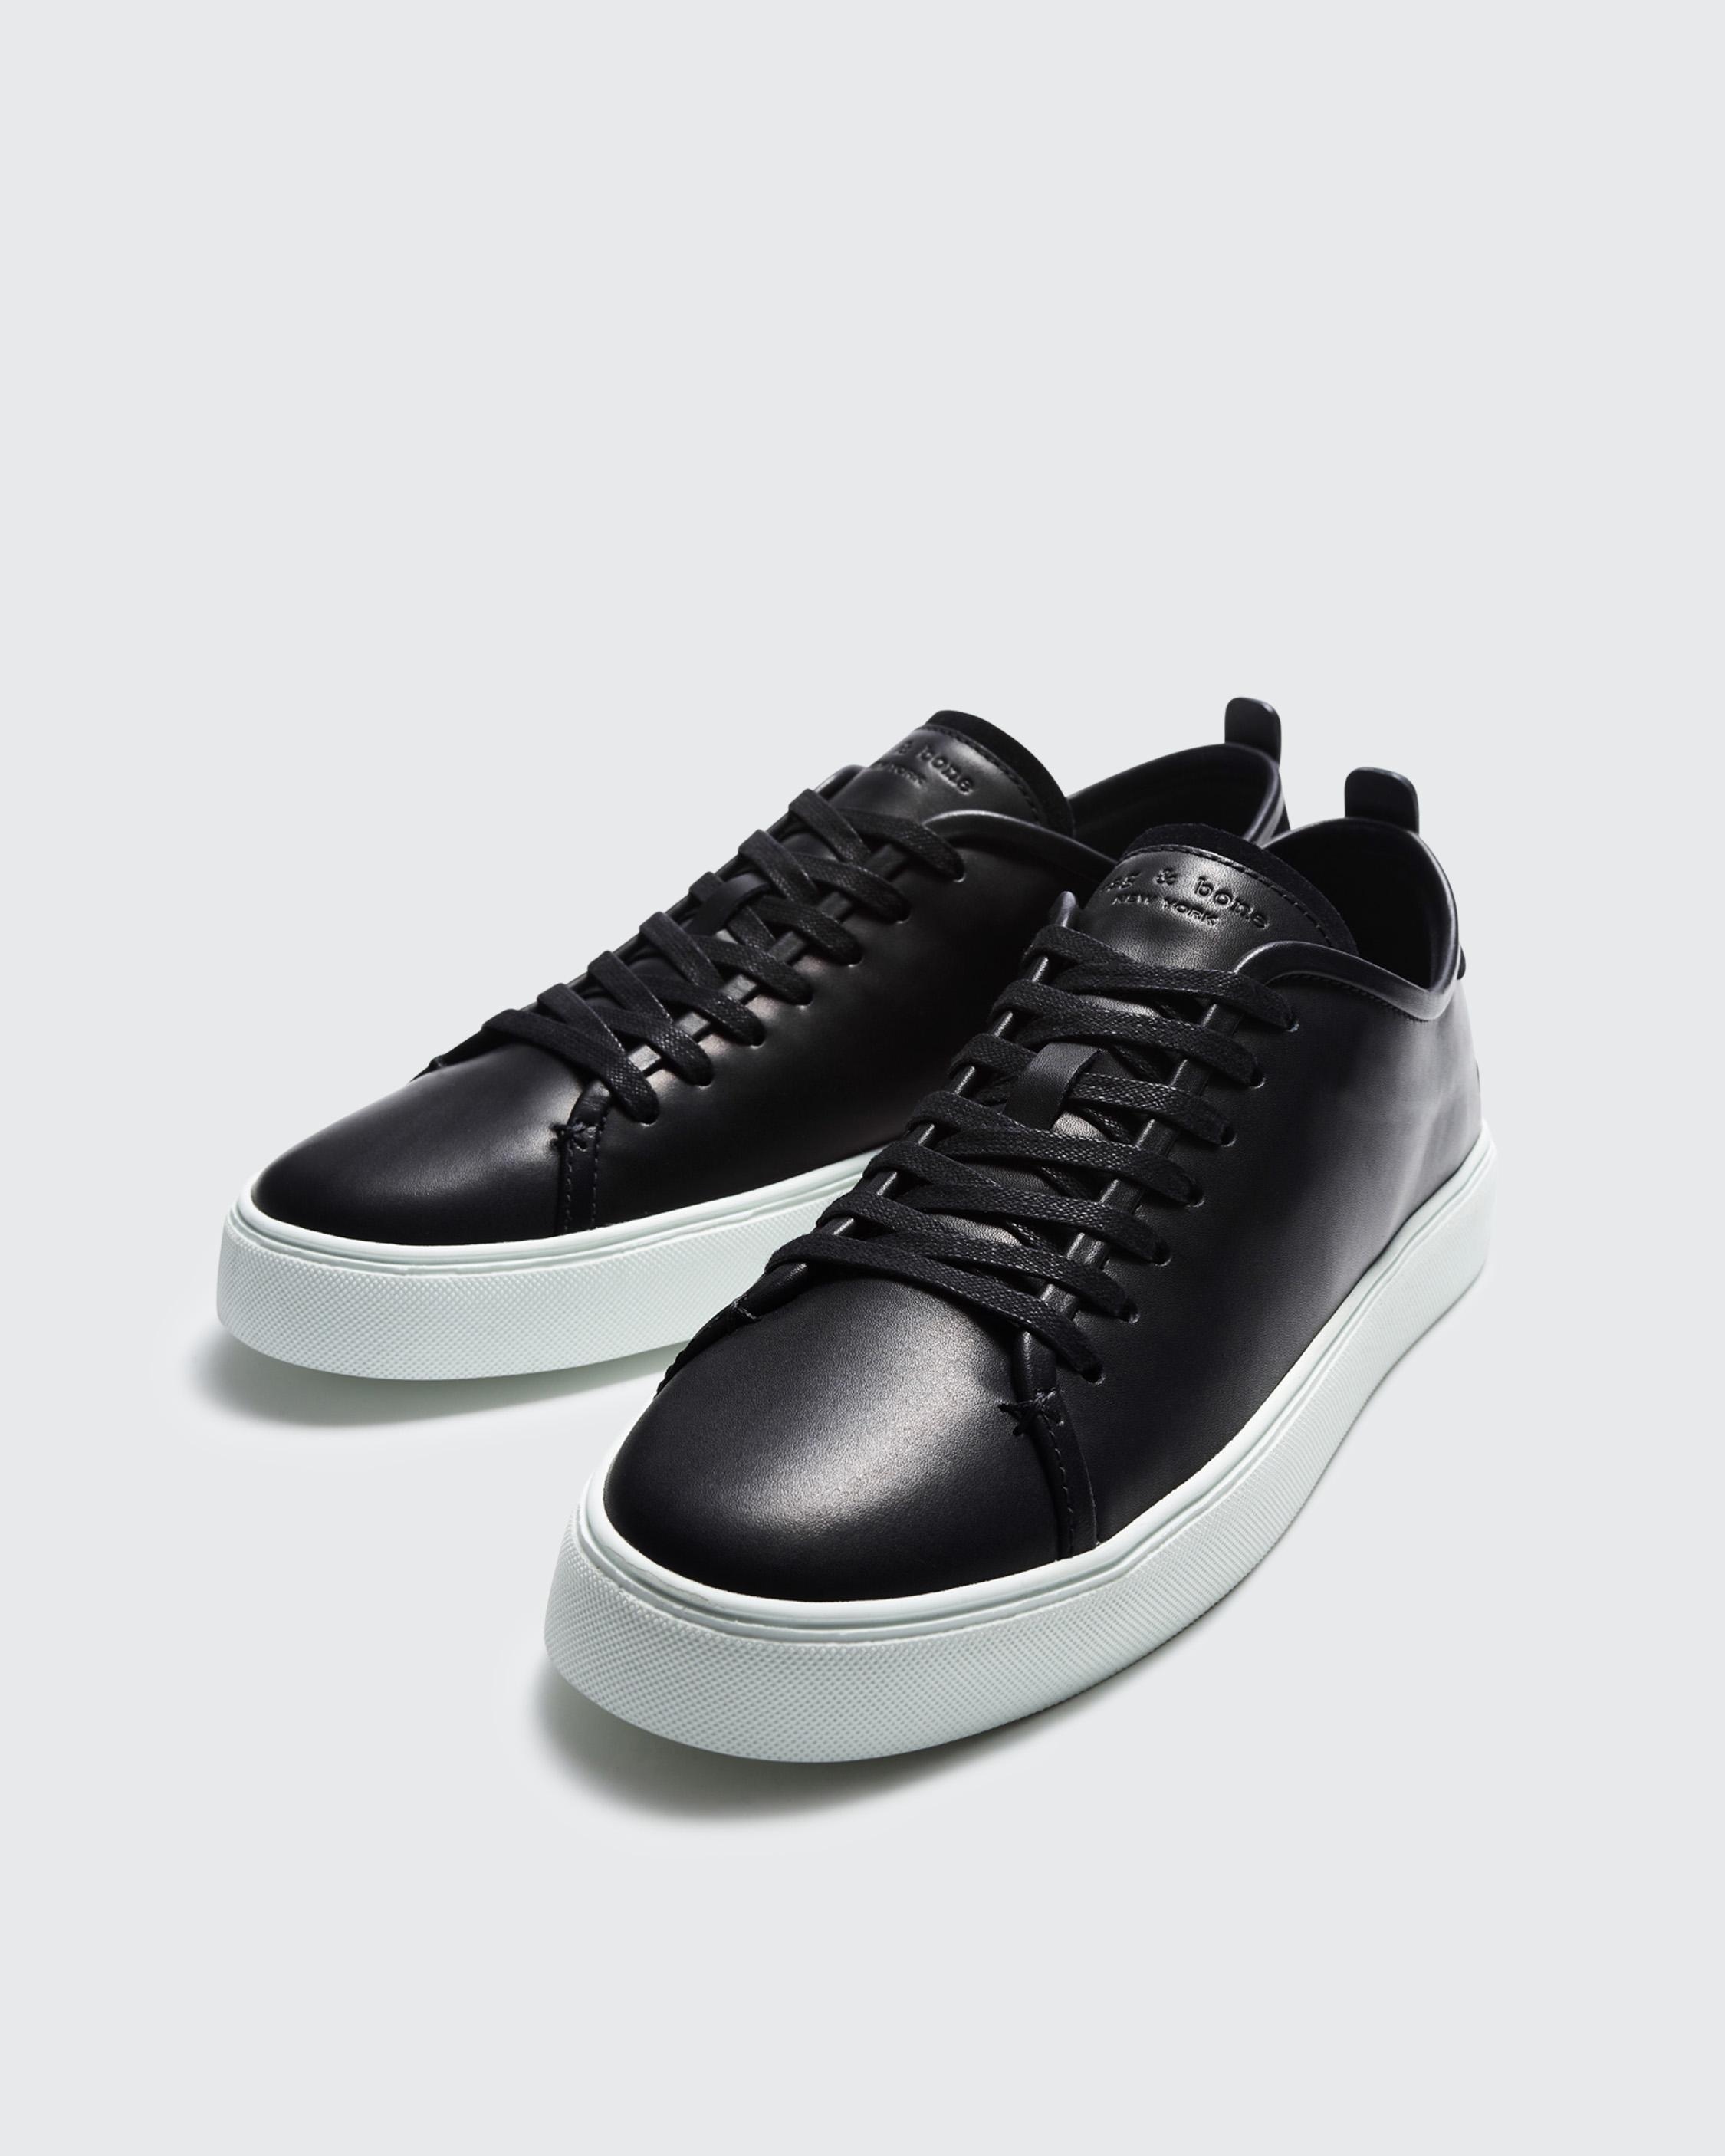 Perry Sneaker - Leather
Low Top Sneaker - 2